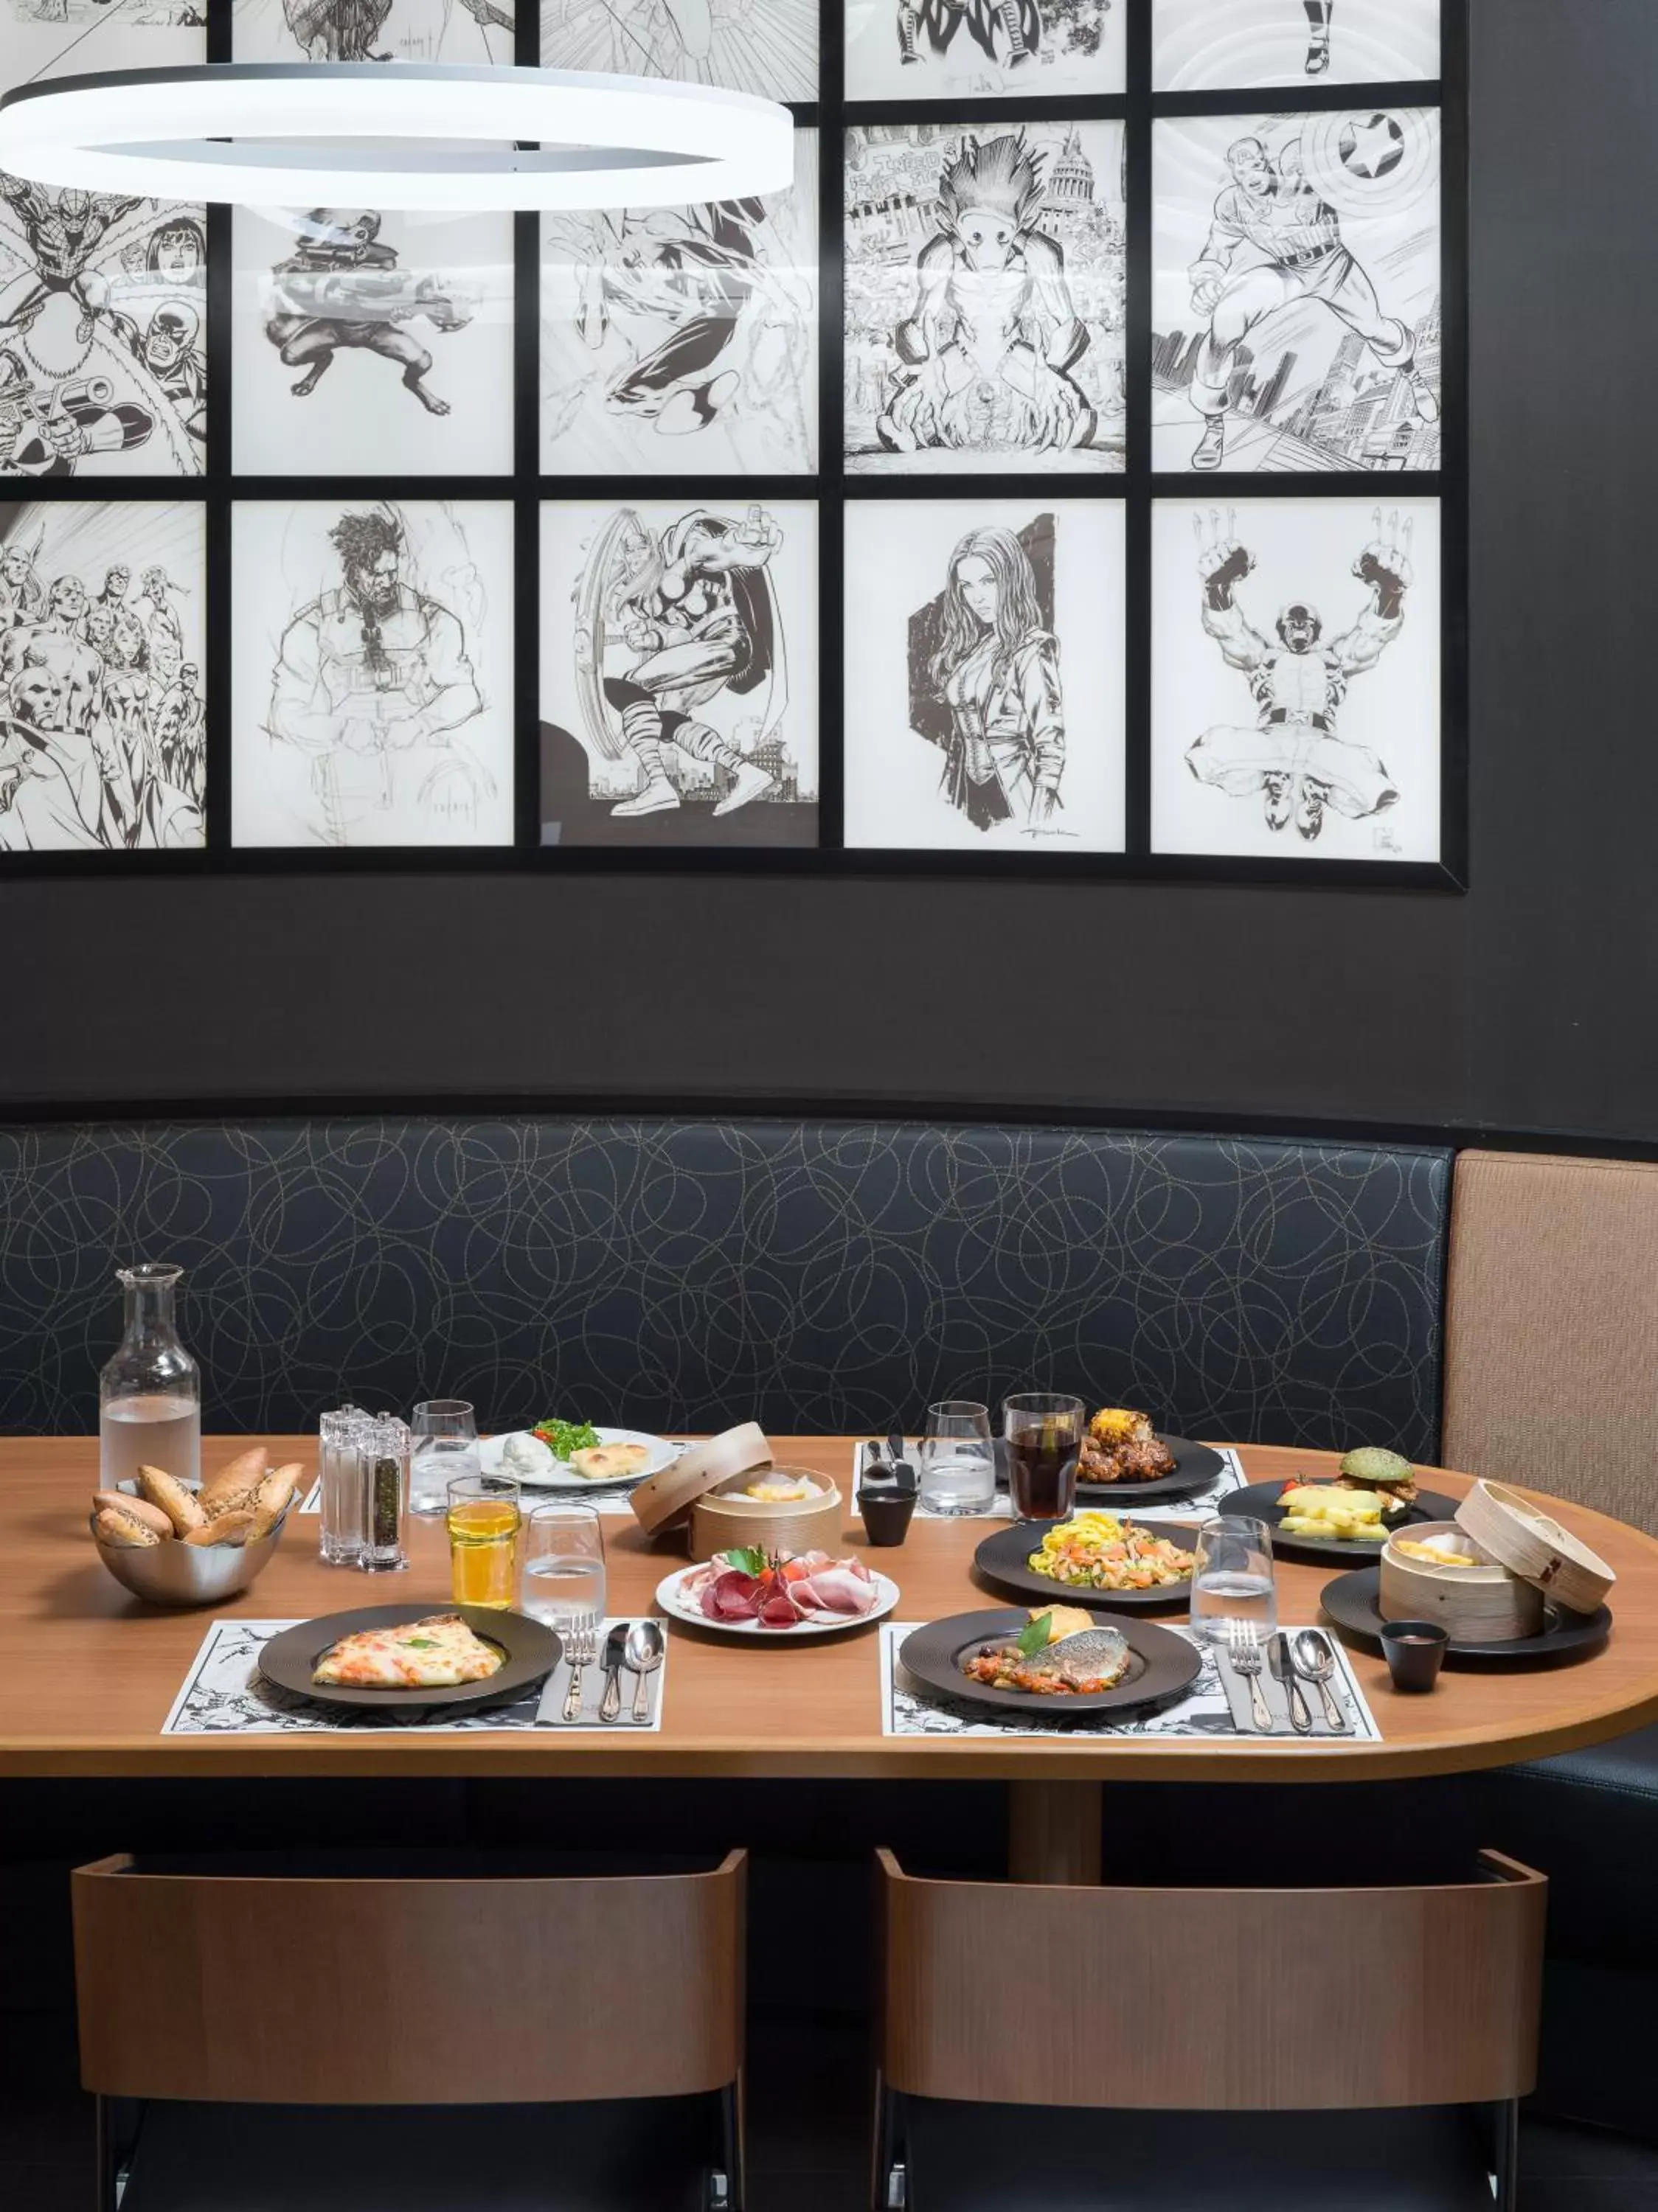 Restaurant/places to eat in Disney Hotel New York - The Art of Marvel